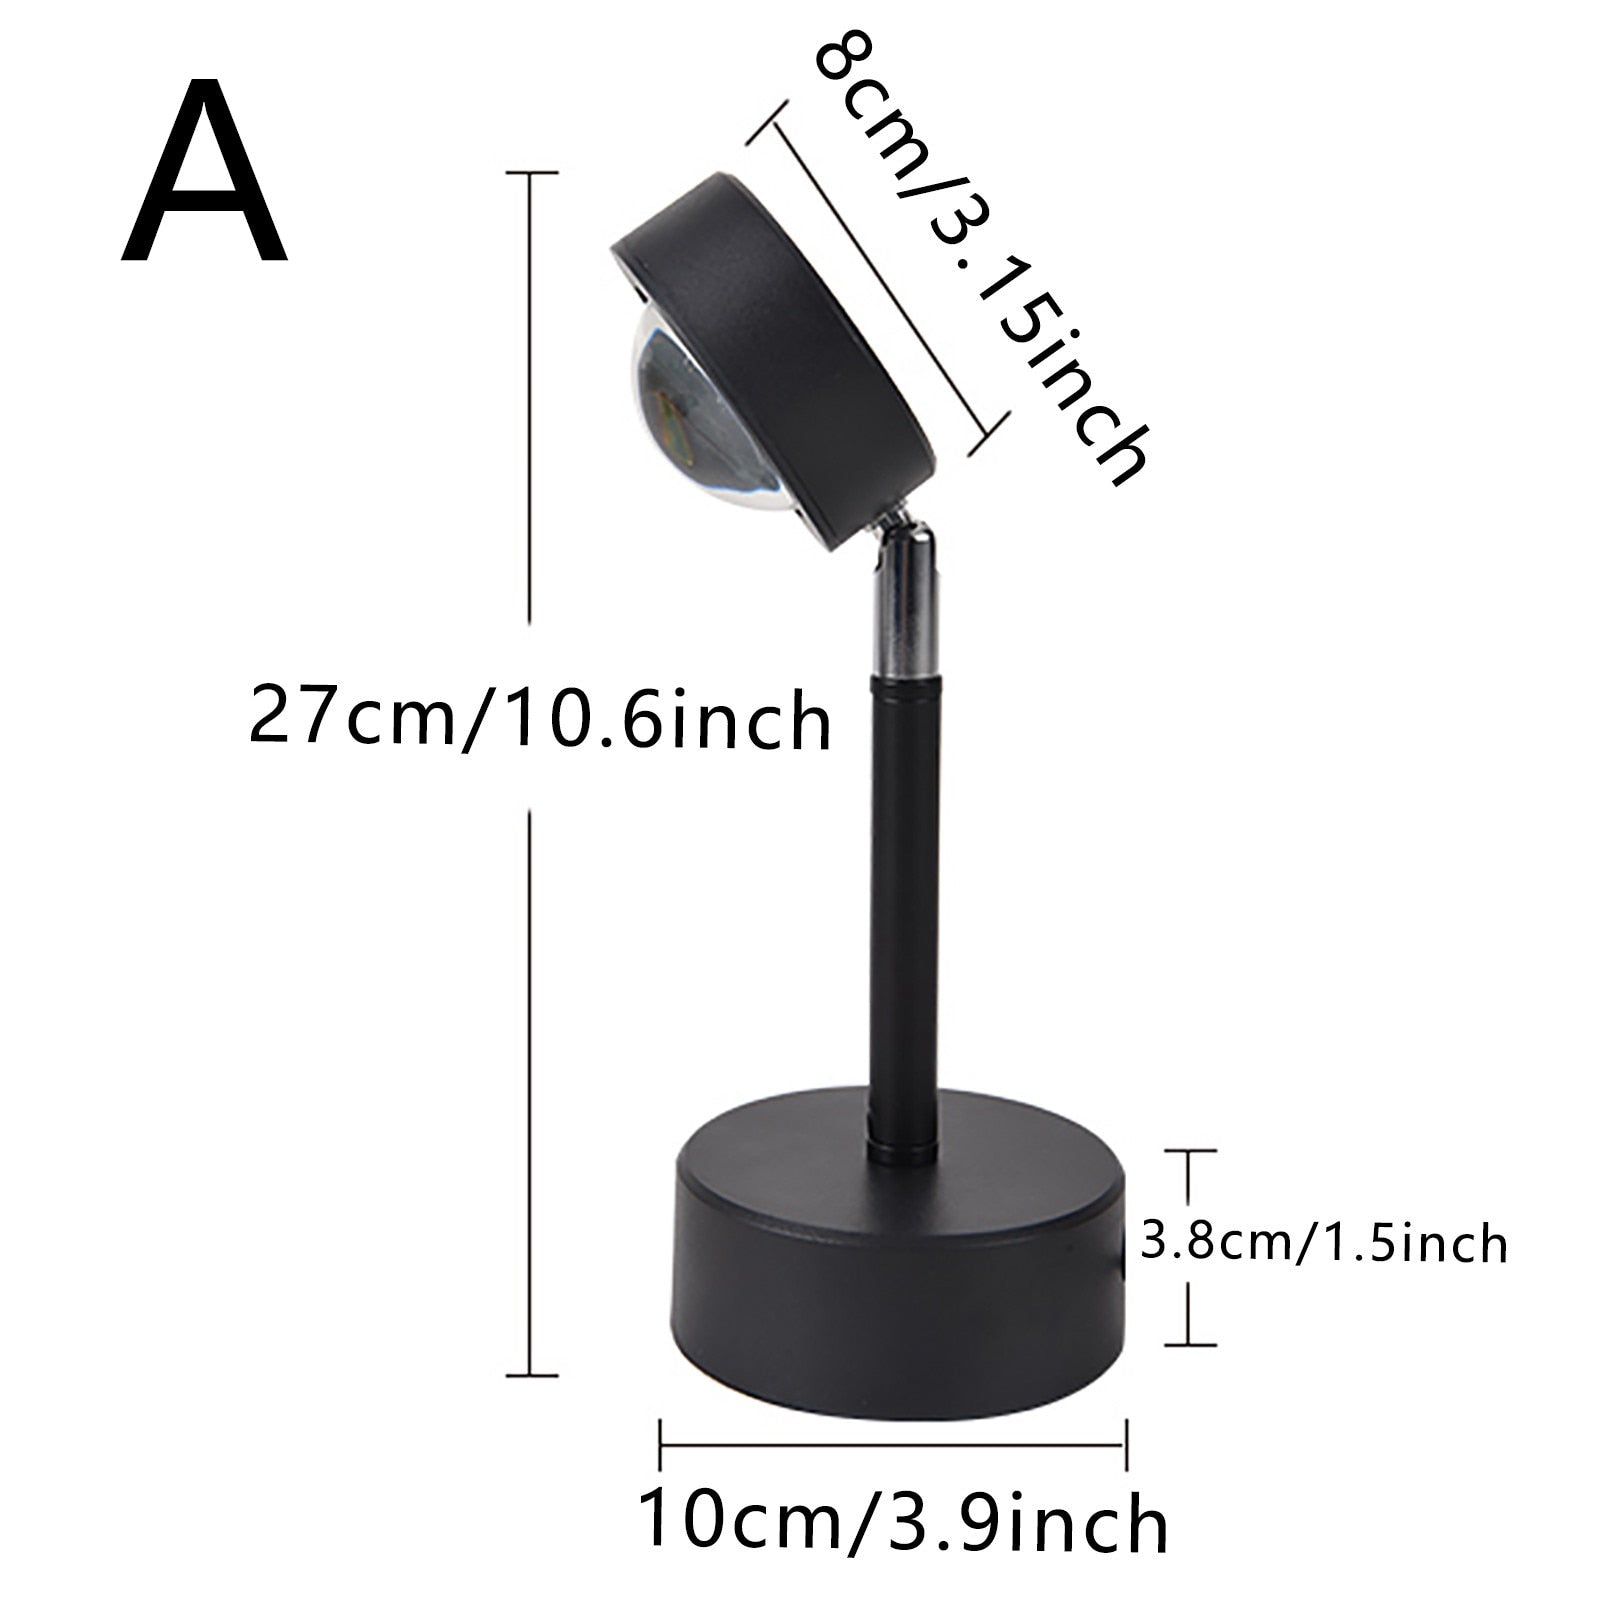 A lamp with dimensions labeled; it has a simple design with a round, adjustable head on a telescopic stand and a circular base.